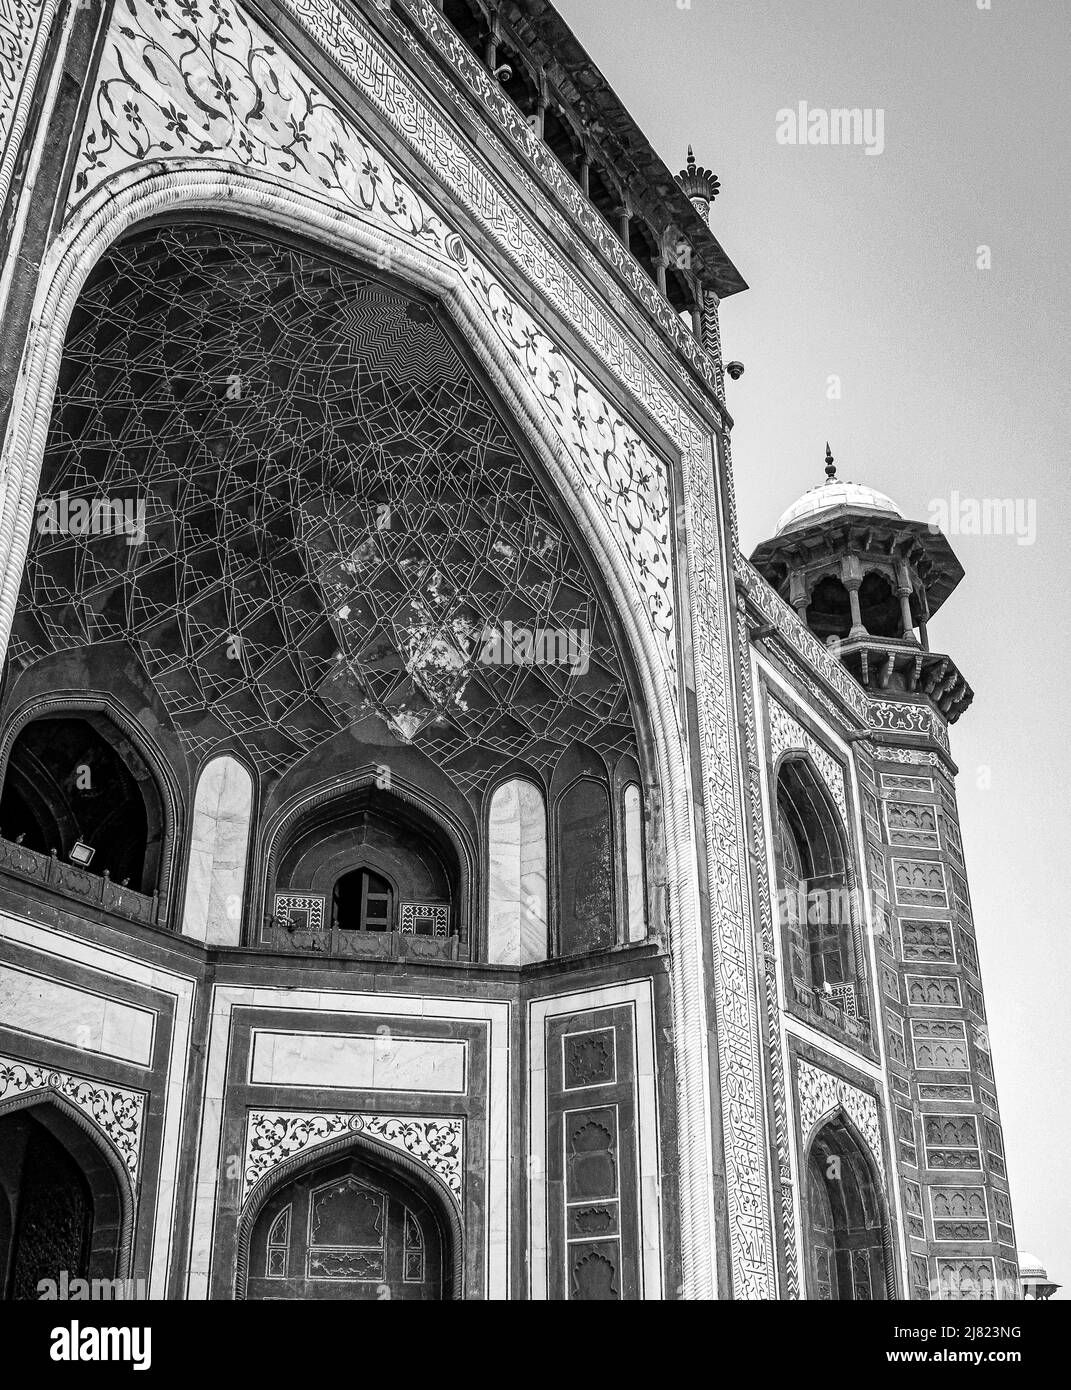 Architecture at The Taj Mahal is an ivory-white marble mausoleum on the south bank of the Yamuna river in the Indian city of Agra, Uttar Pradesh, Taj Stock Photo